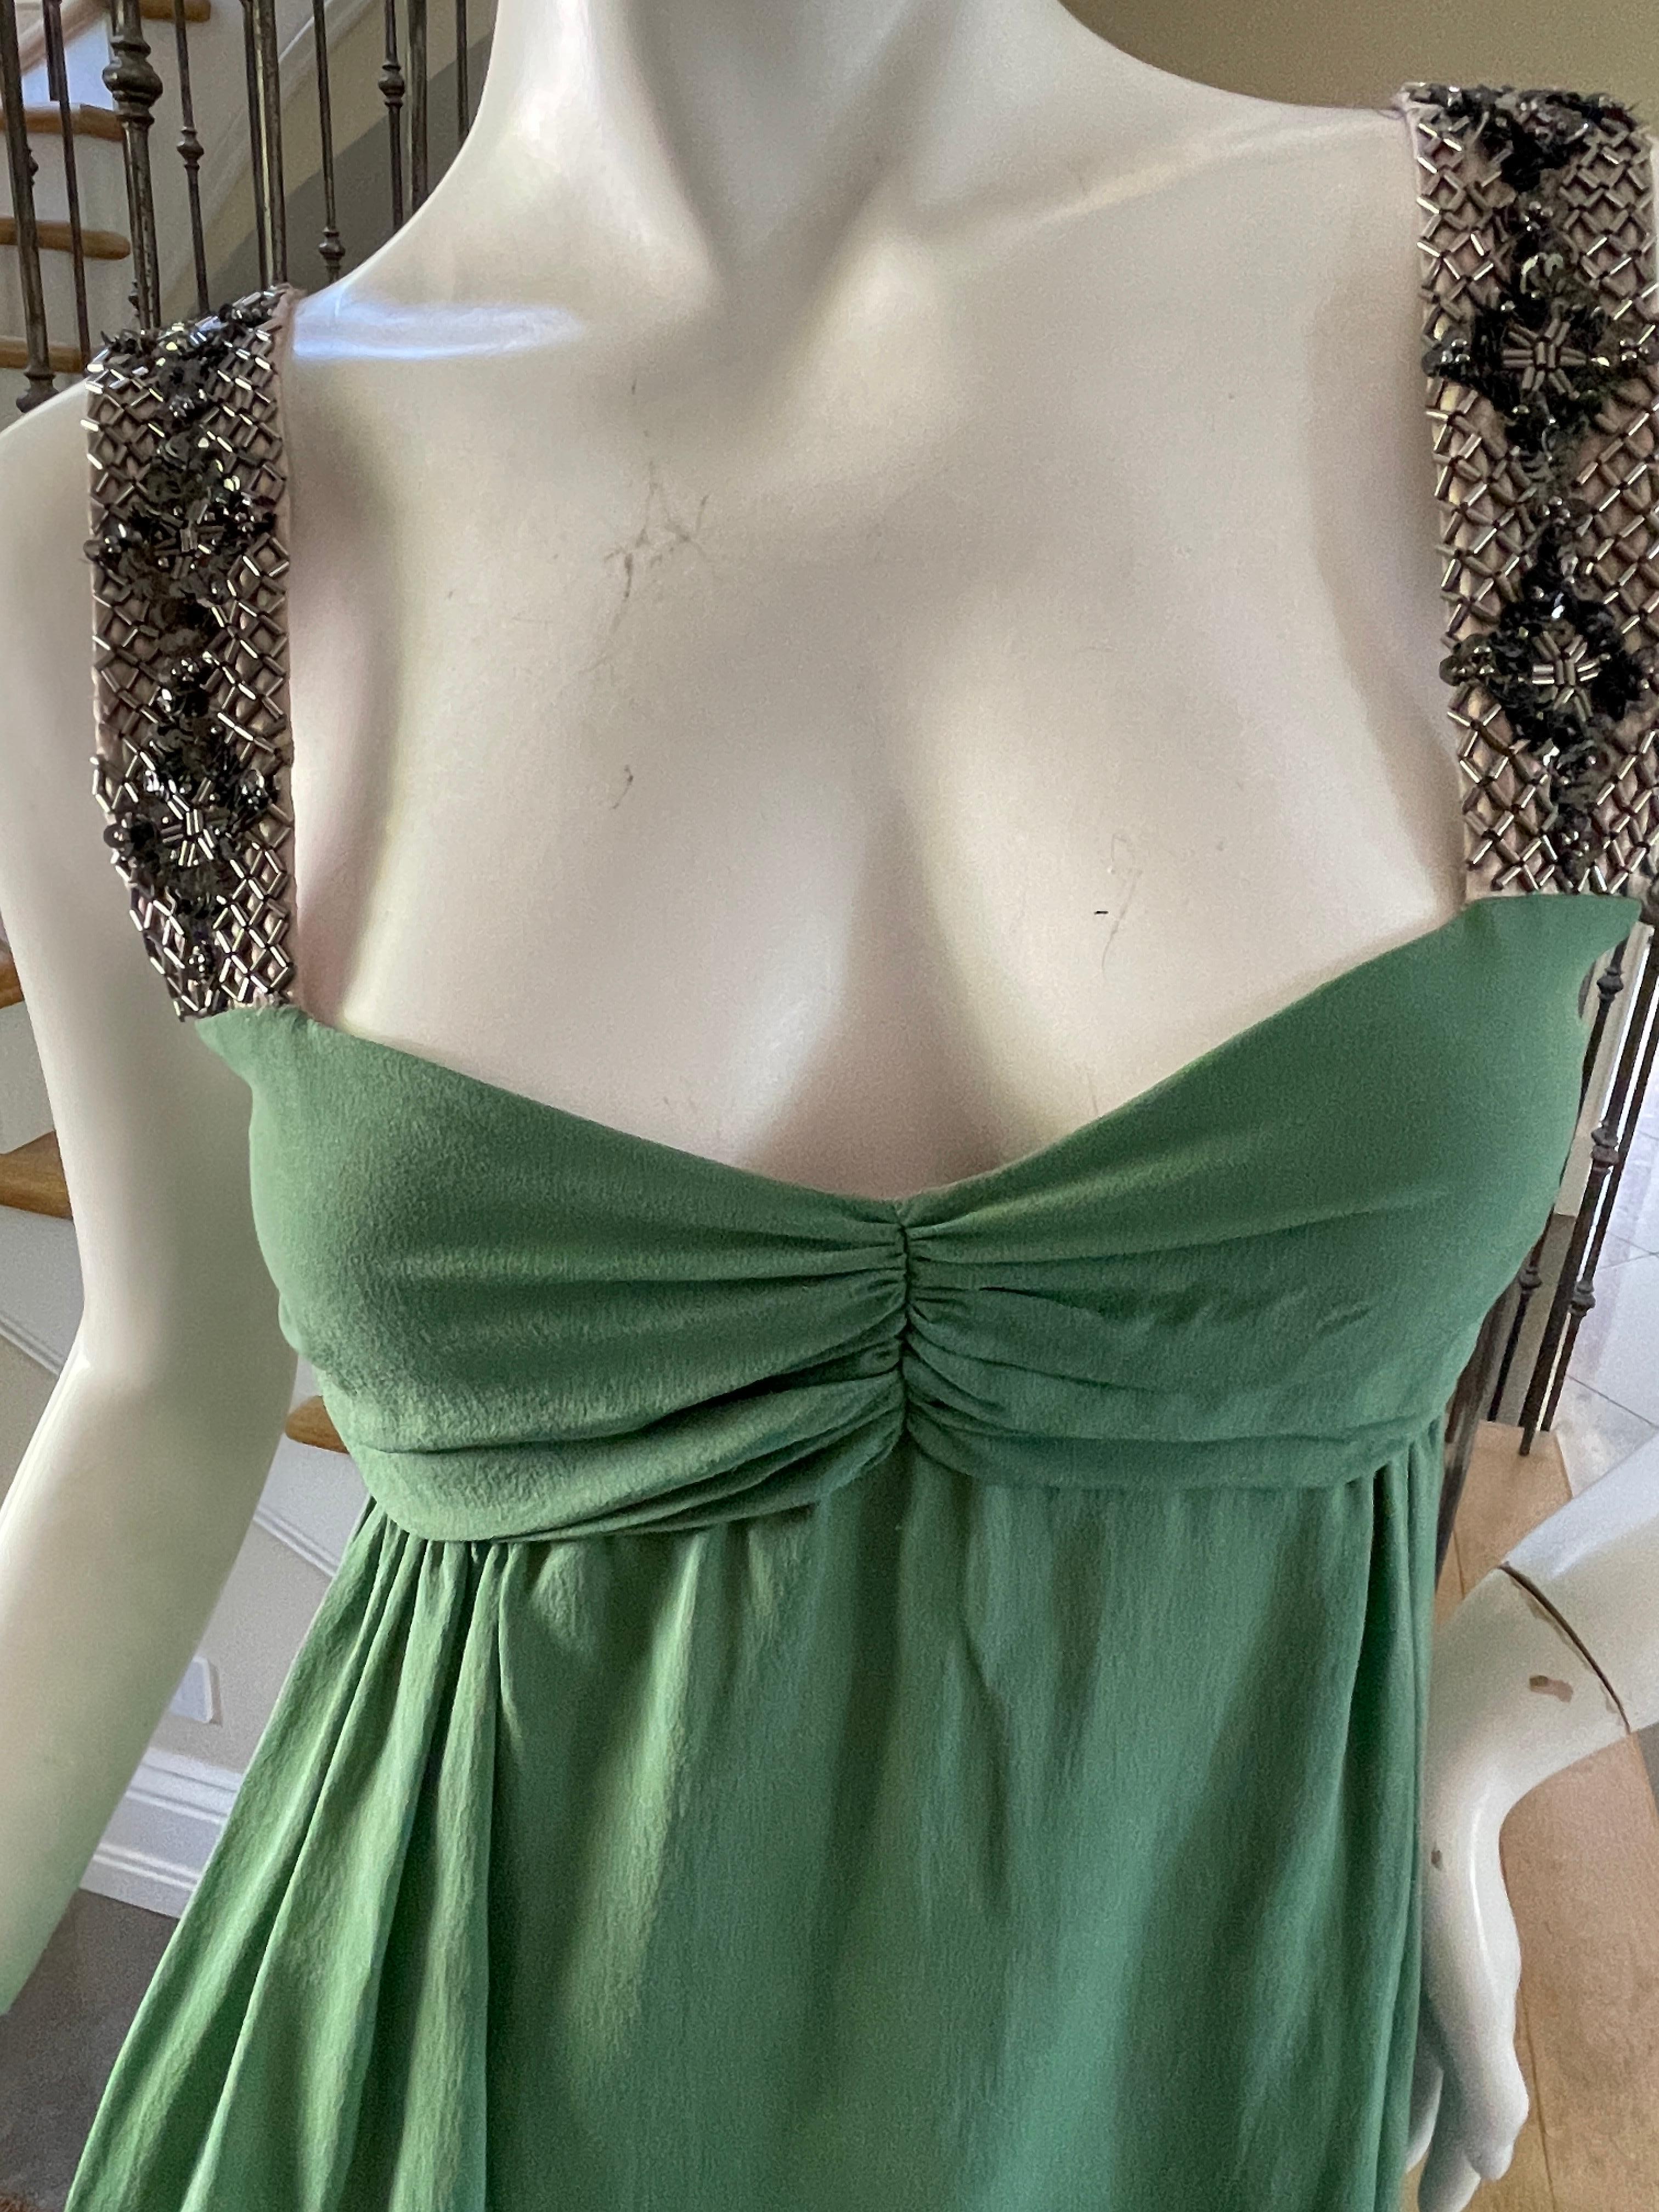  Gianfranco Ferre Vintage Green Silk Embellished Baby Doll Dress  In Excellent Condition For Sale In Cloverdale, CA